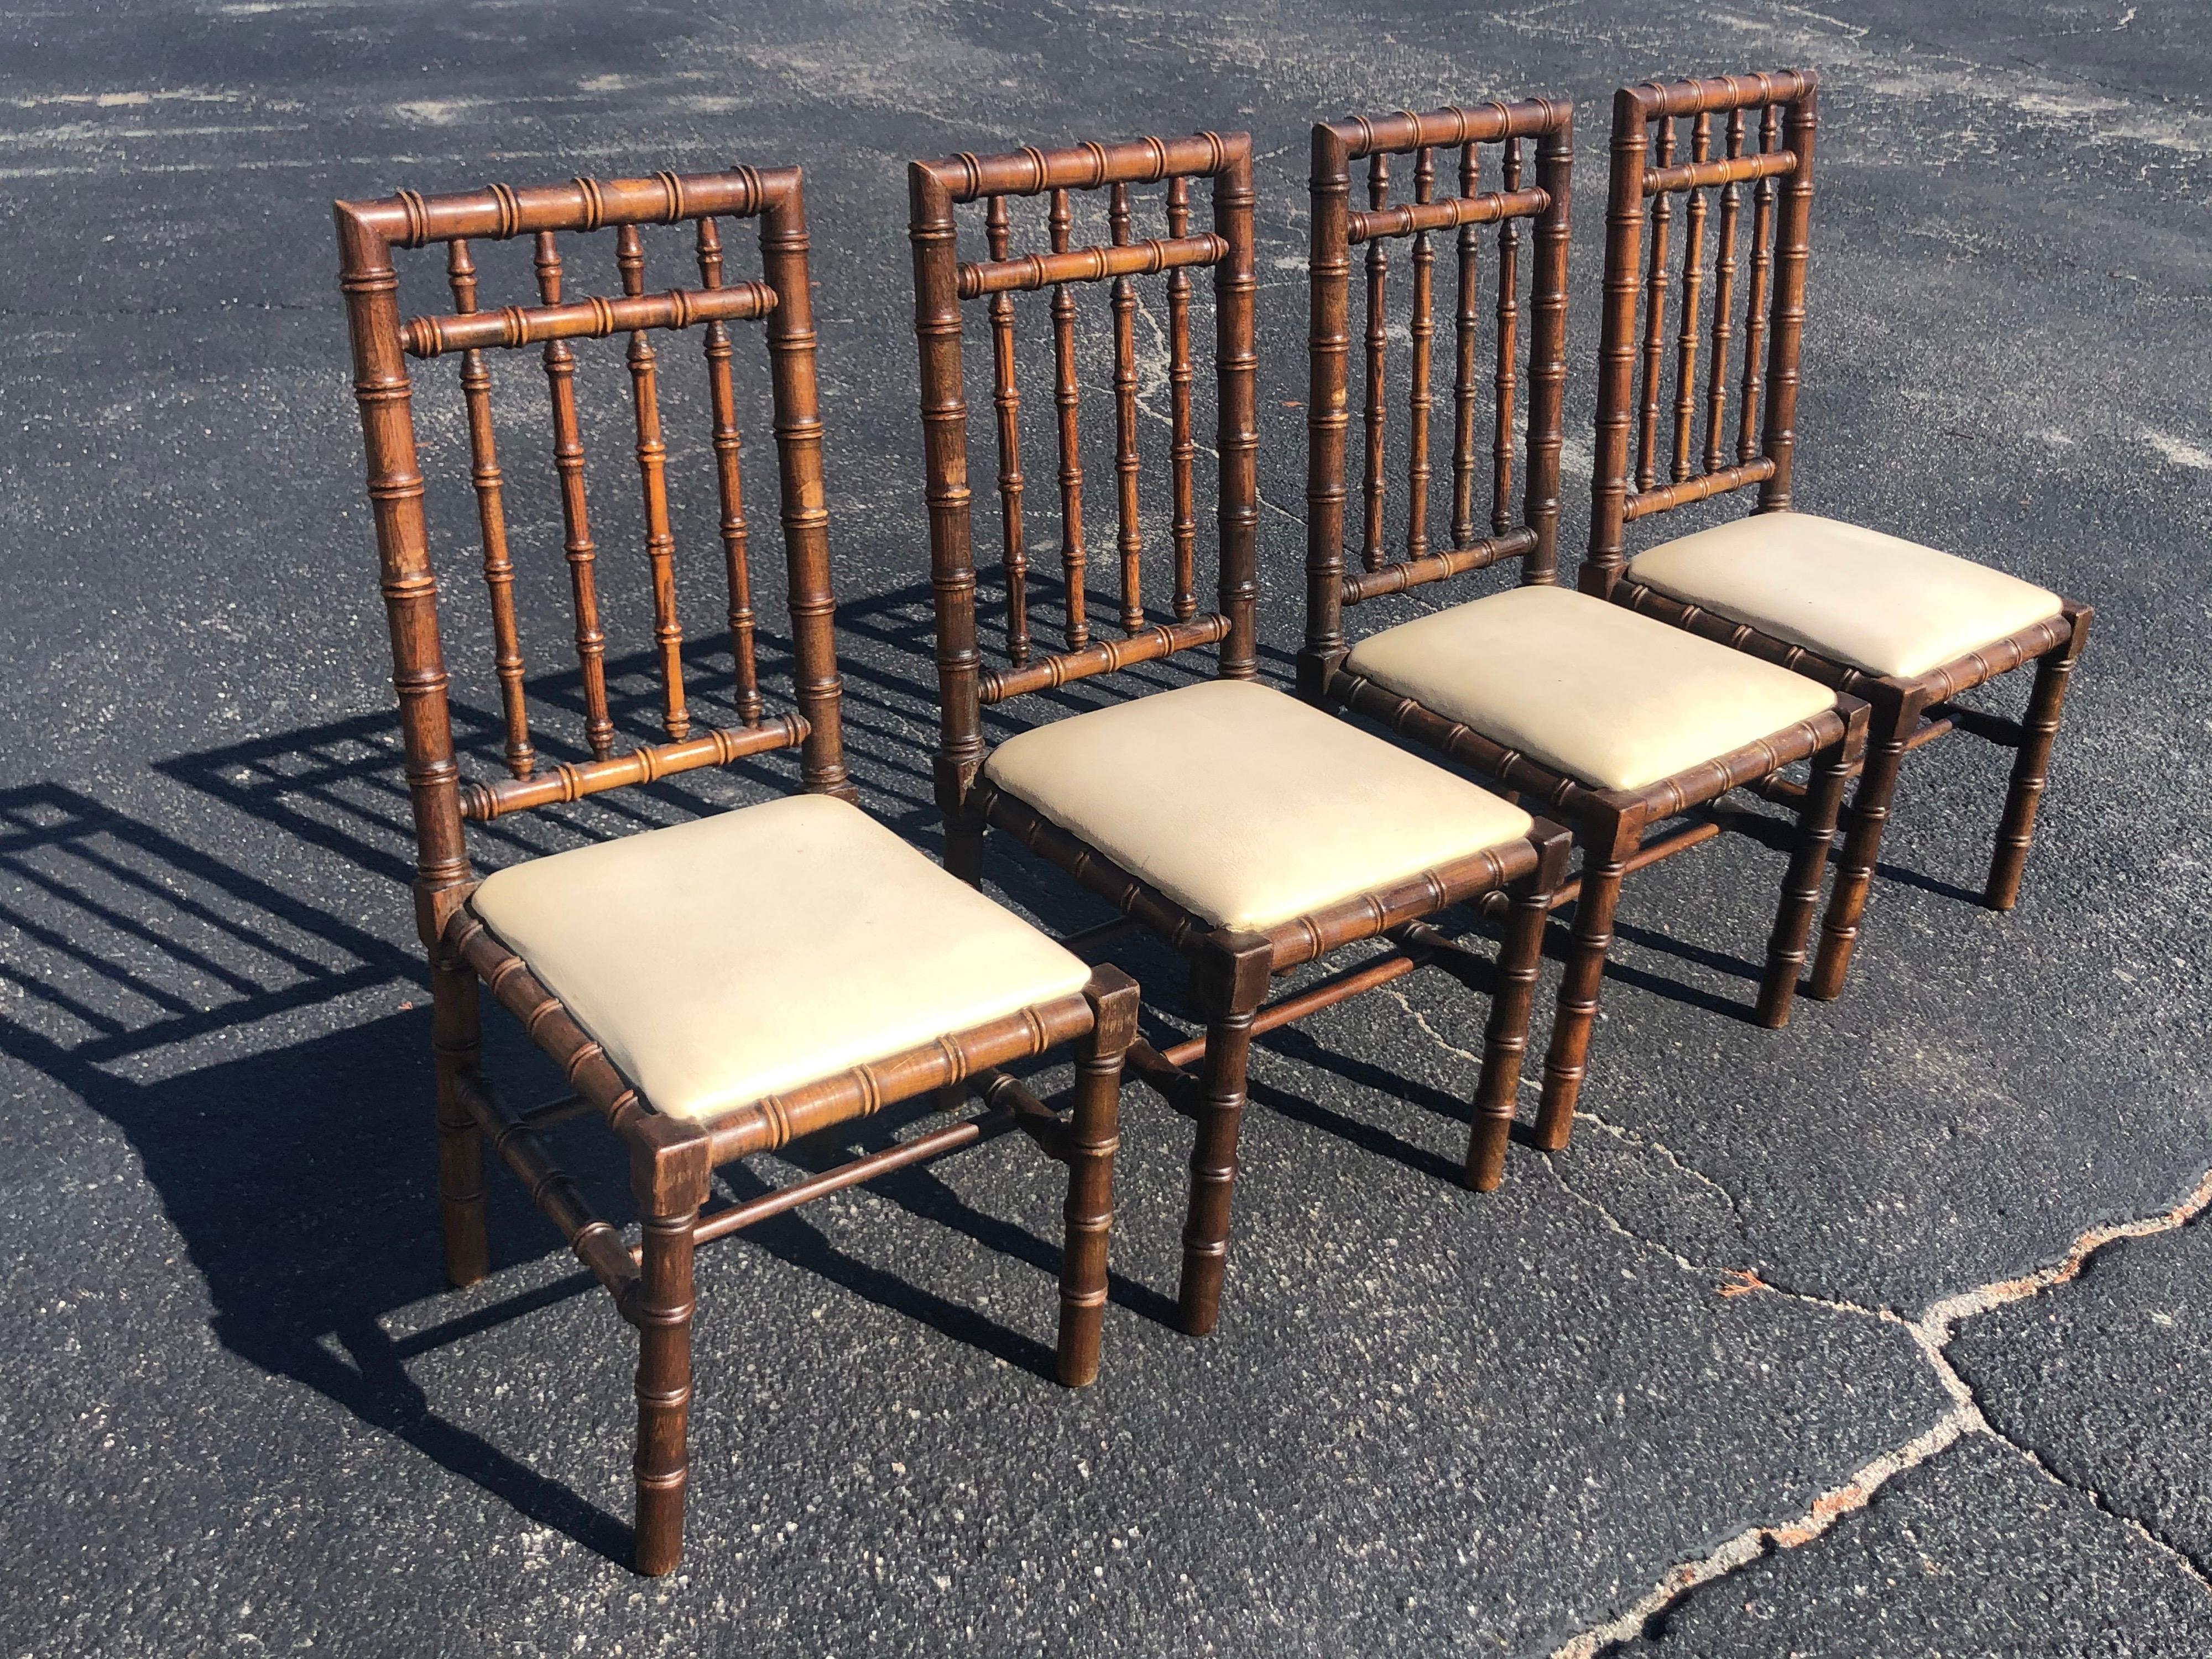 Set of four Mid Century faux bamboo chairs. These highly detailed carved chairs are made of solid oak wood. They have an off-white vinyl seat pad. Also available are a matching dining table and credenza. This whole set would look great with a high